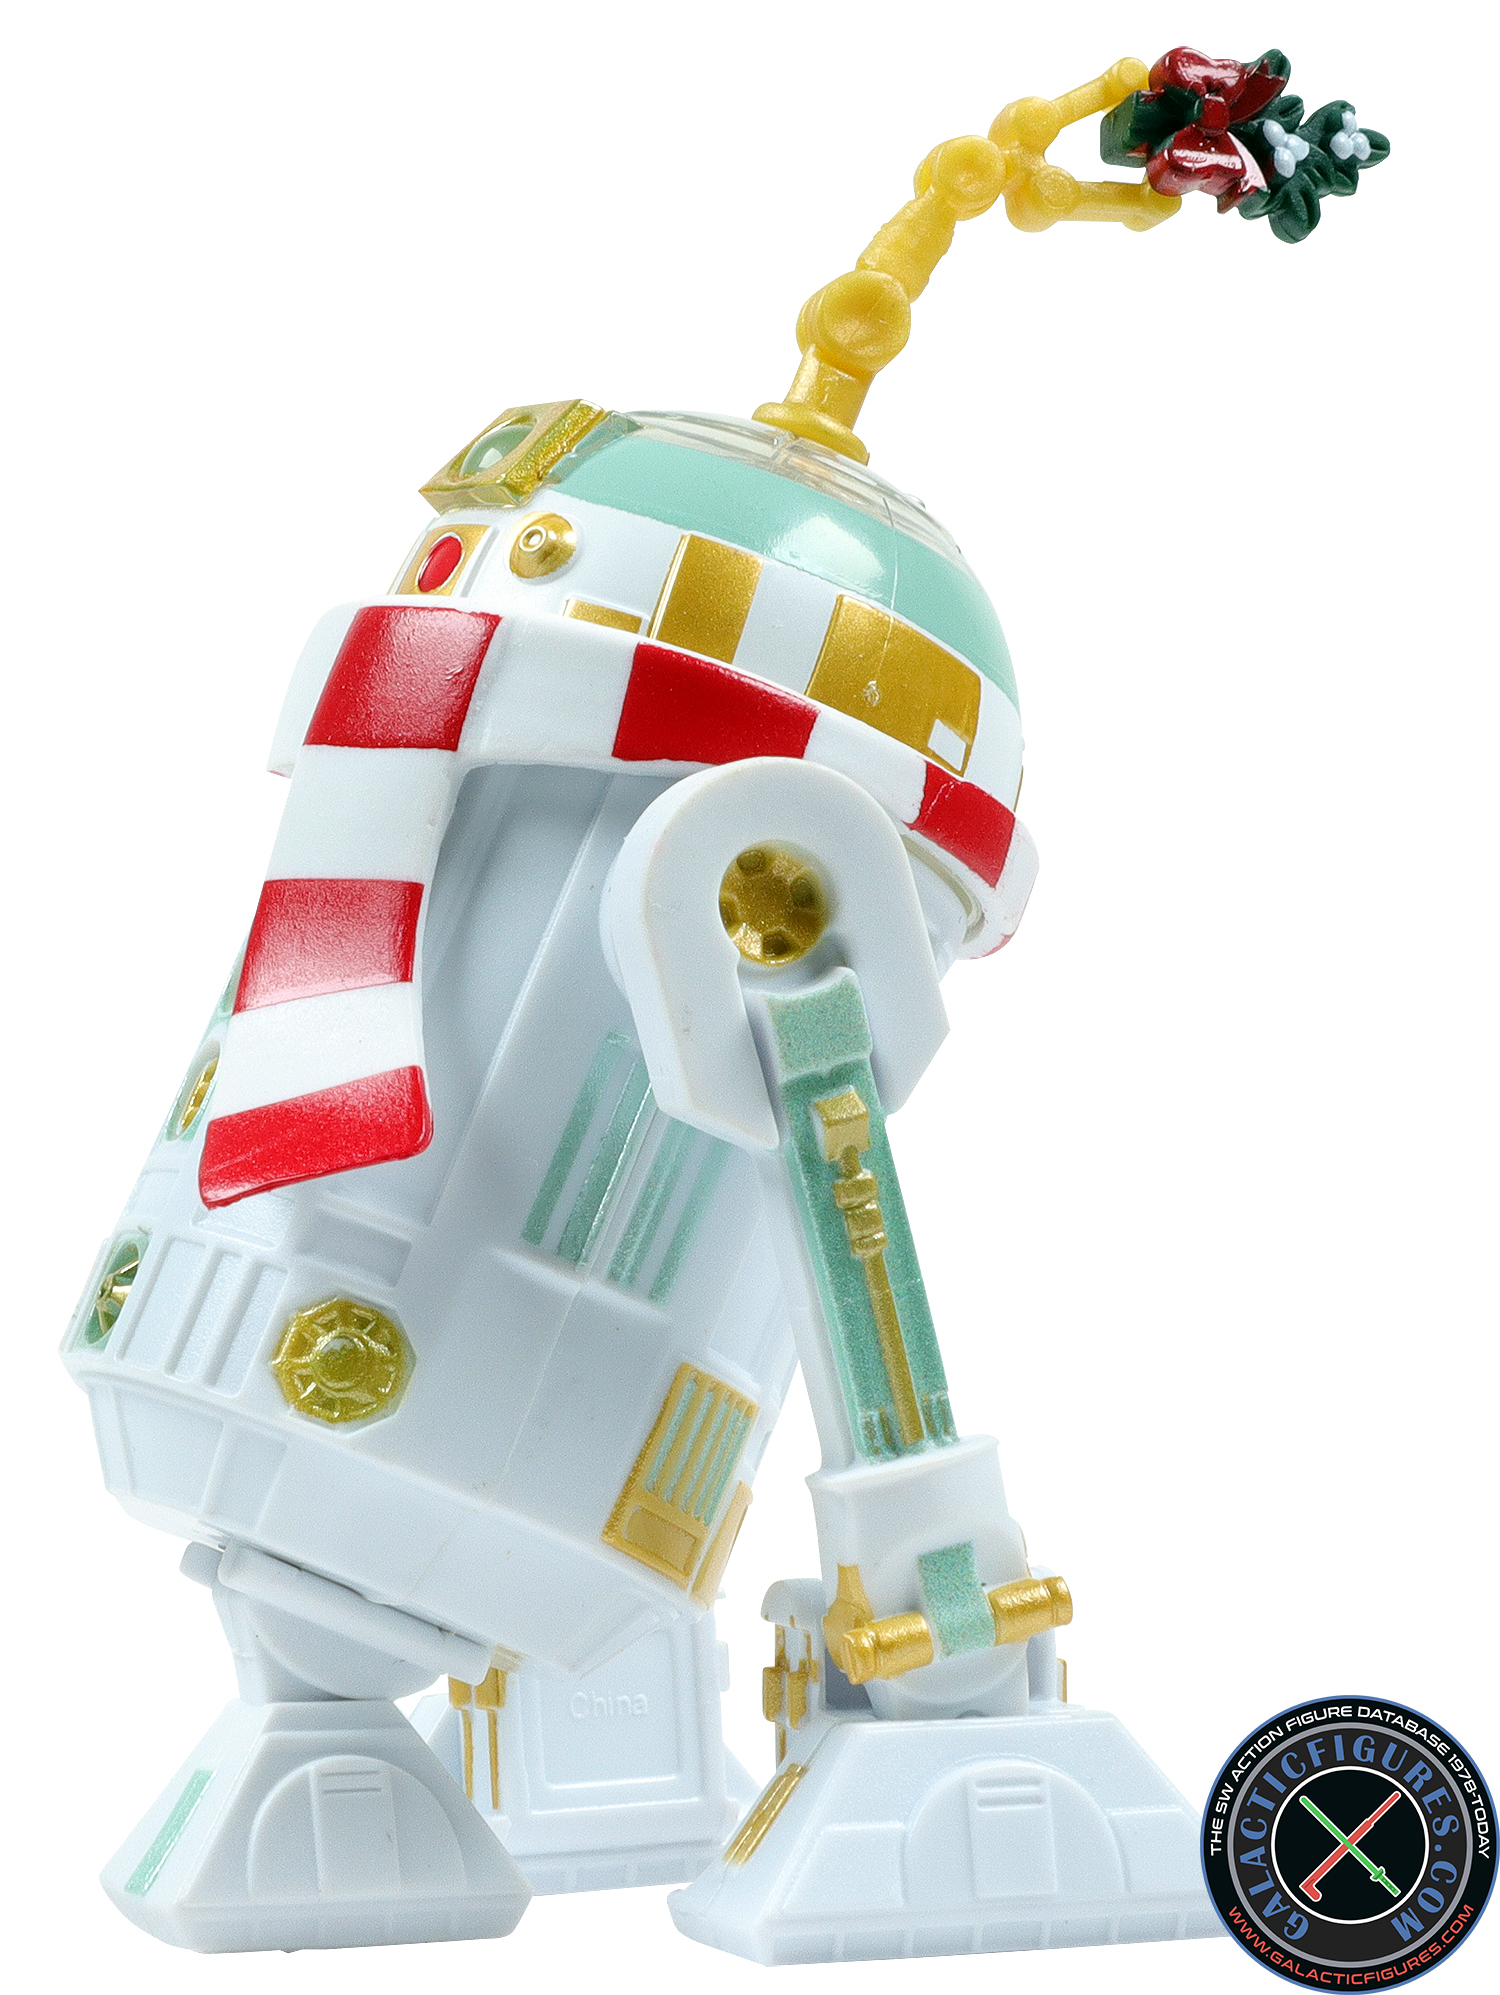 R3-H17 Droid Factory Holiday 4-Pack 2021